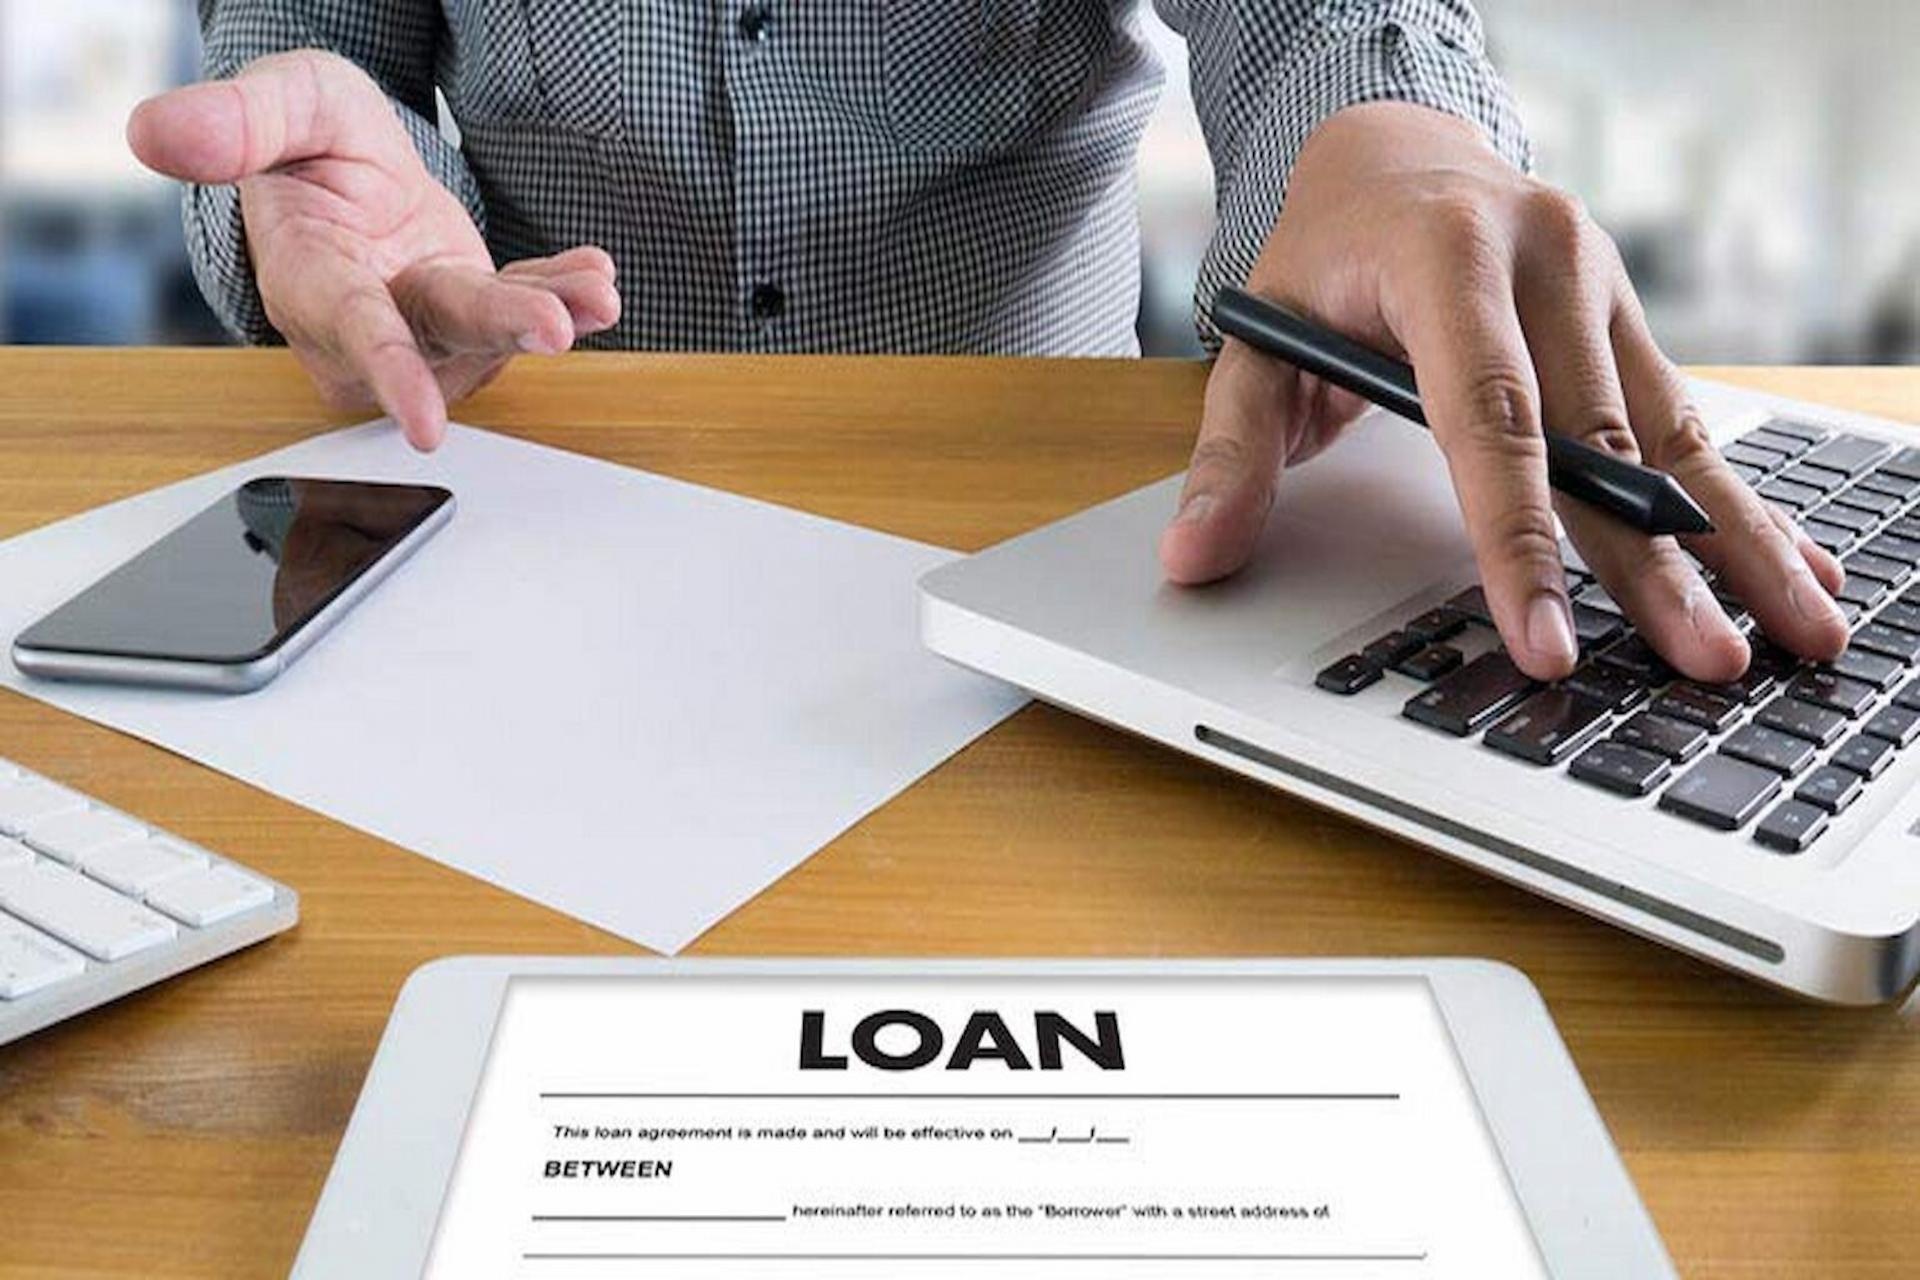 Your Guide to Finding the Best Loan Source: Banks, Online Lenders, and More